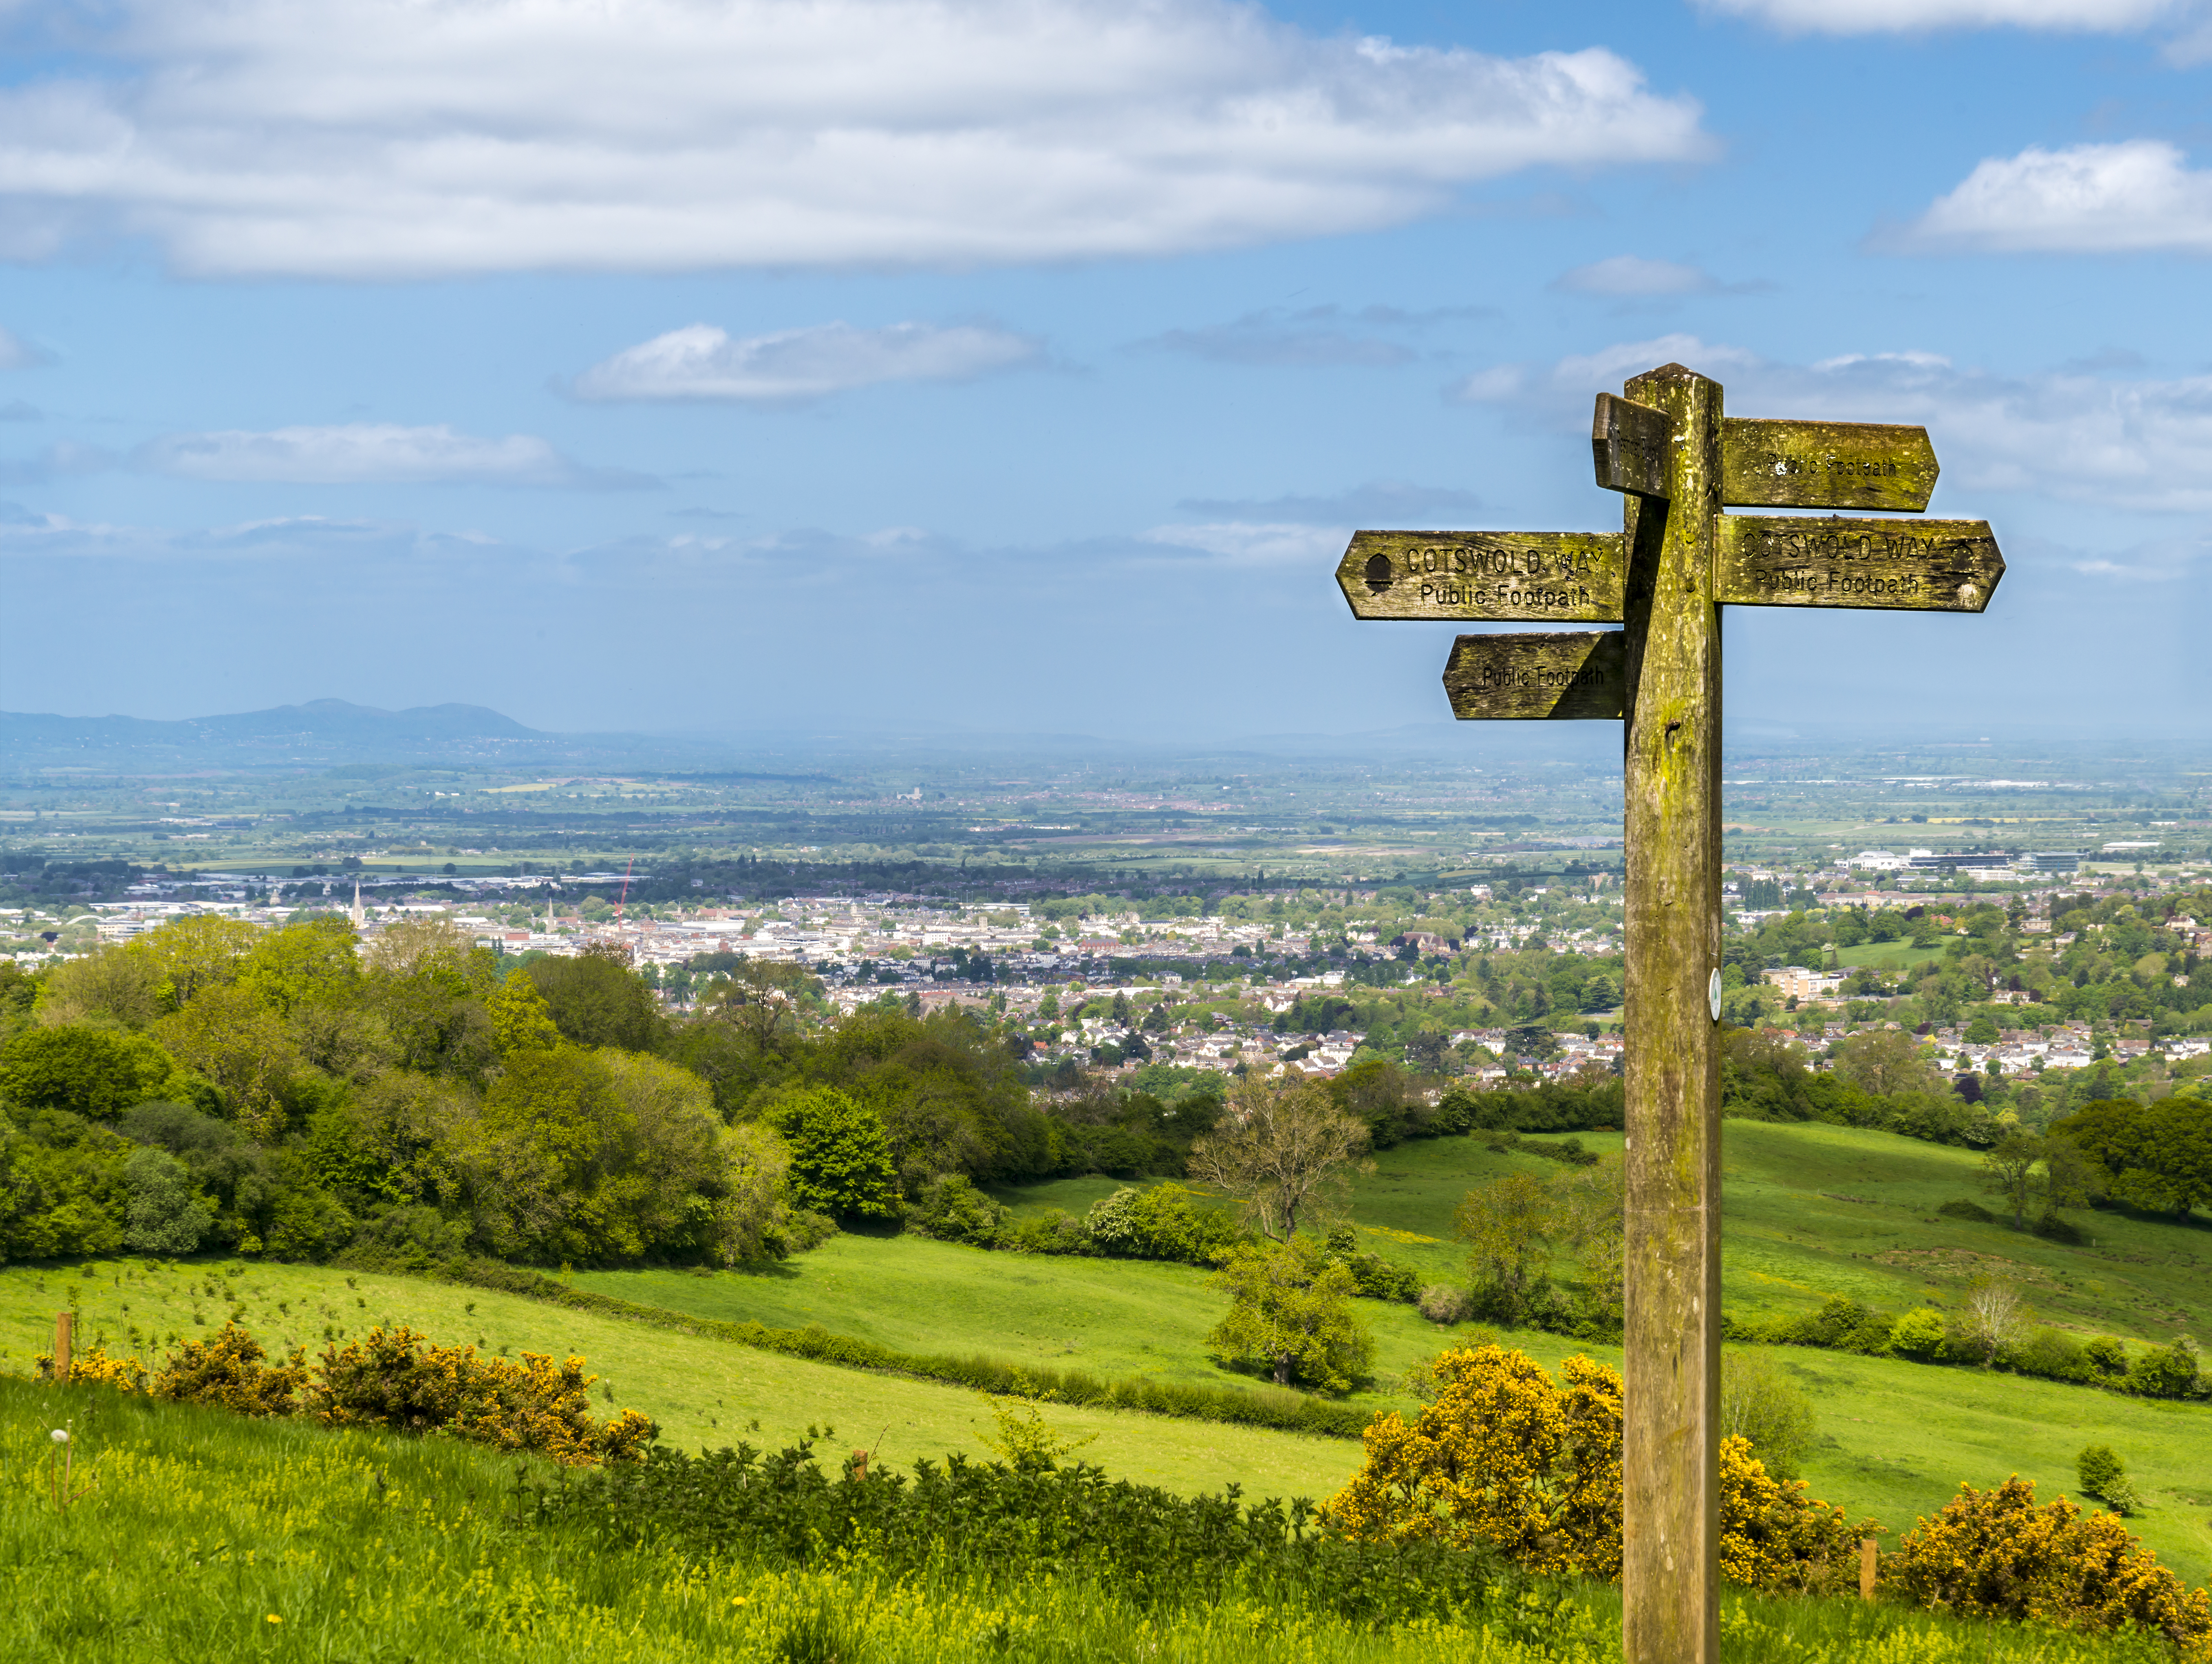 Image of a crossroads sign in the countryside, with a view over green fields